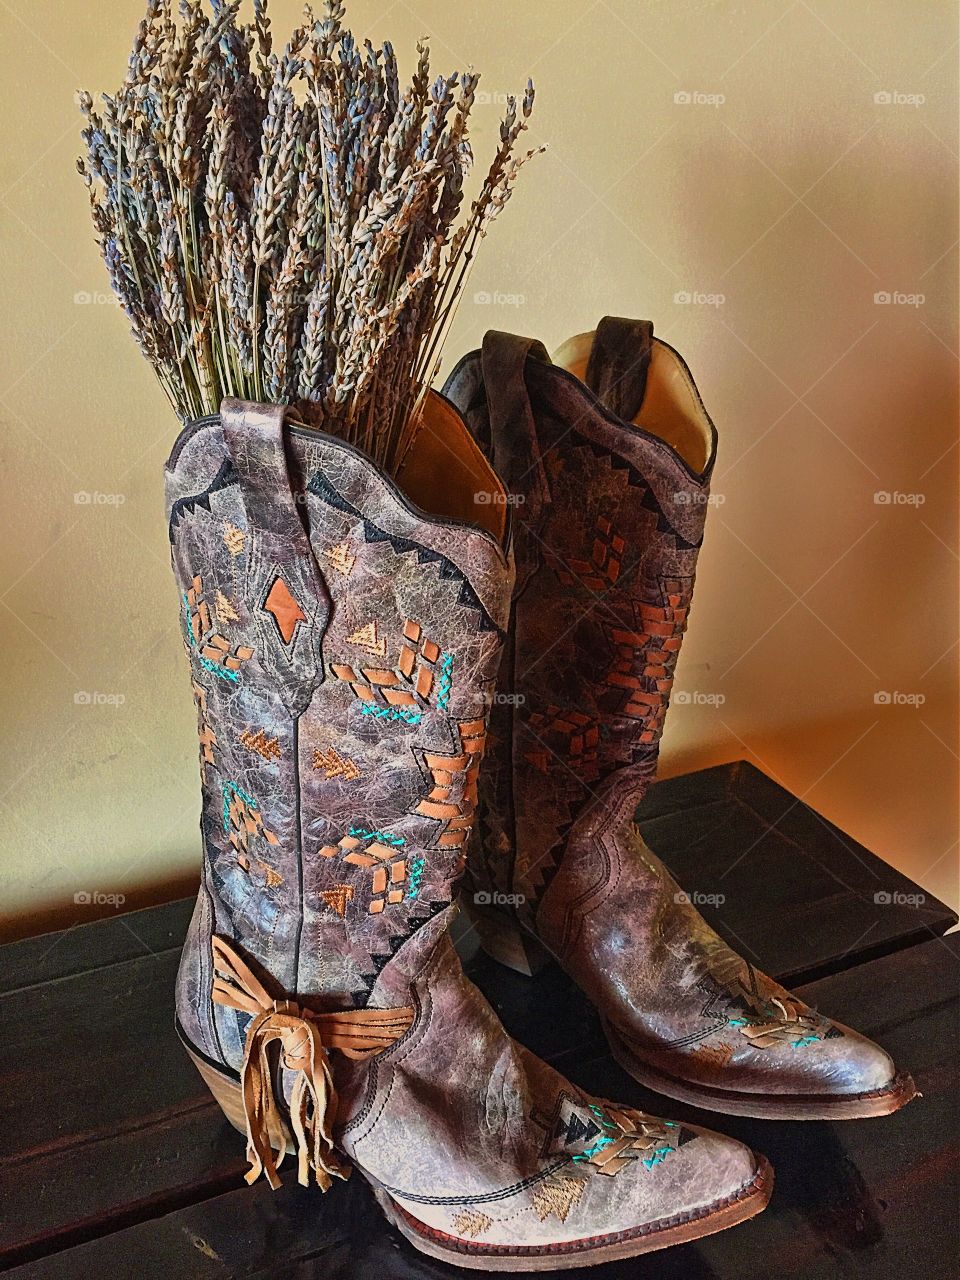 Rustic Cowboy boots flower display ai Pioneer Woman’s ranch in Oklahoma. 